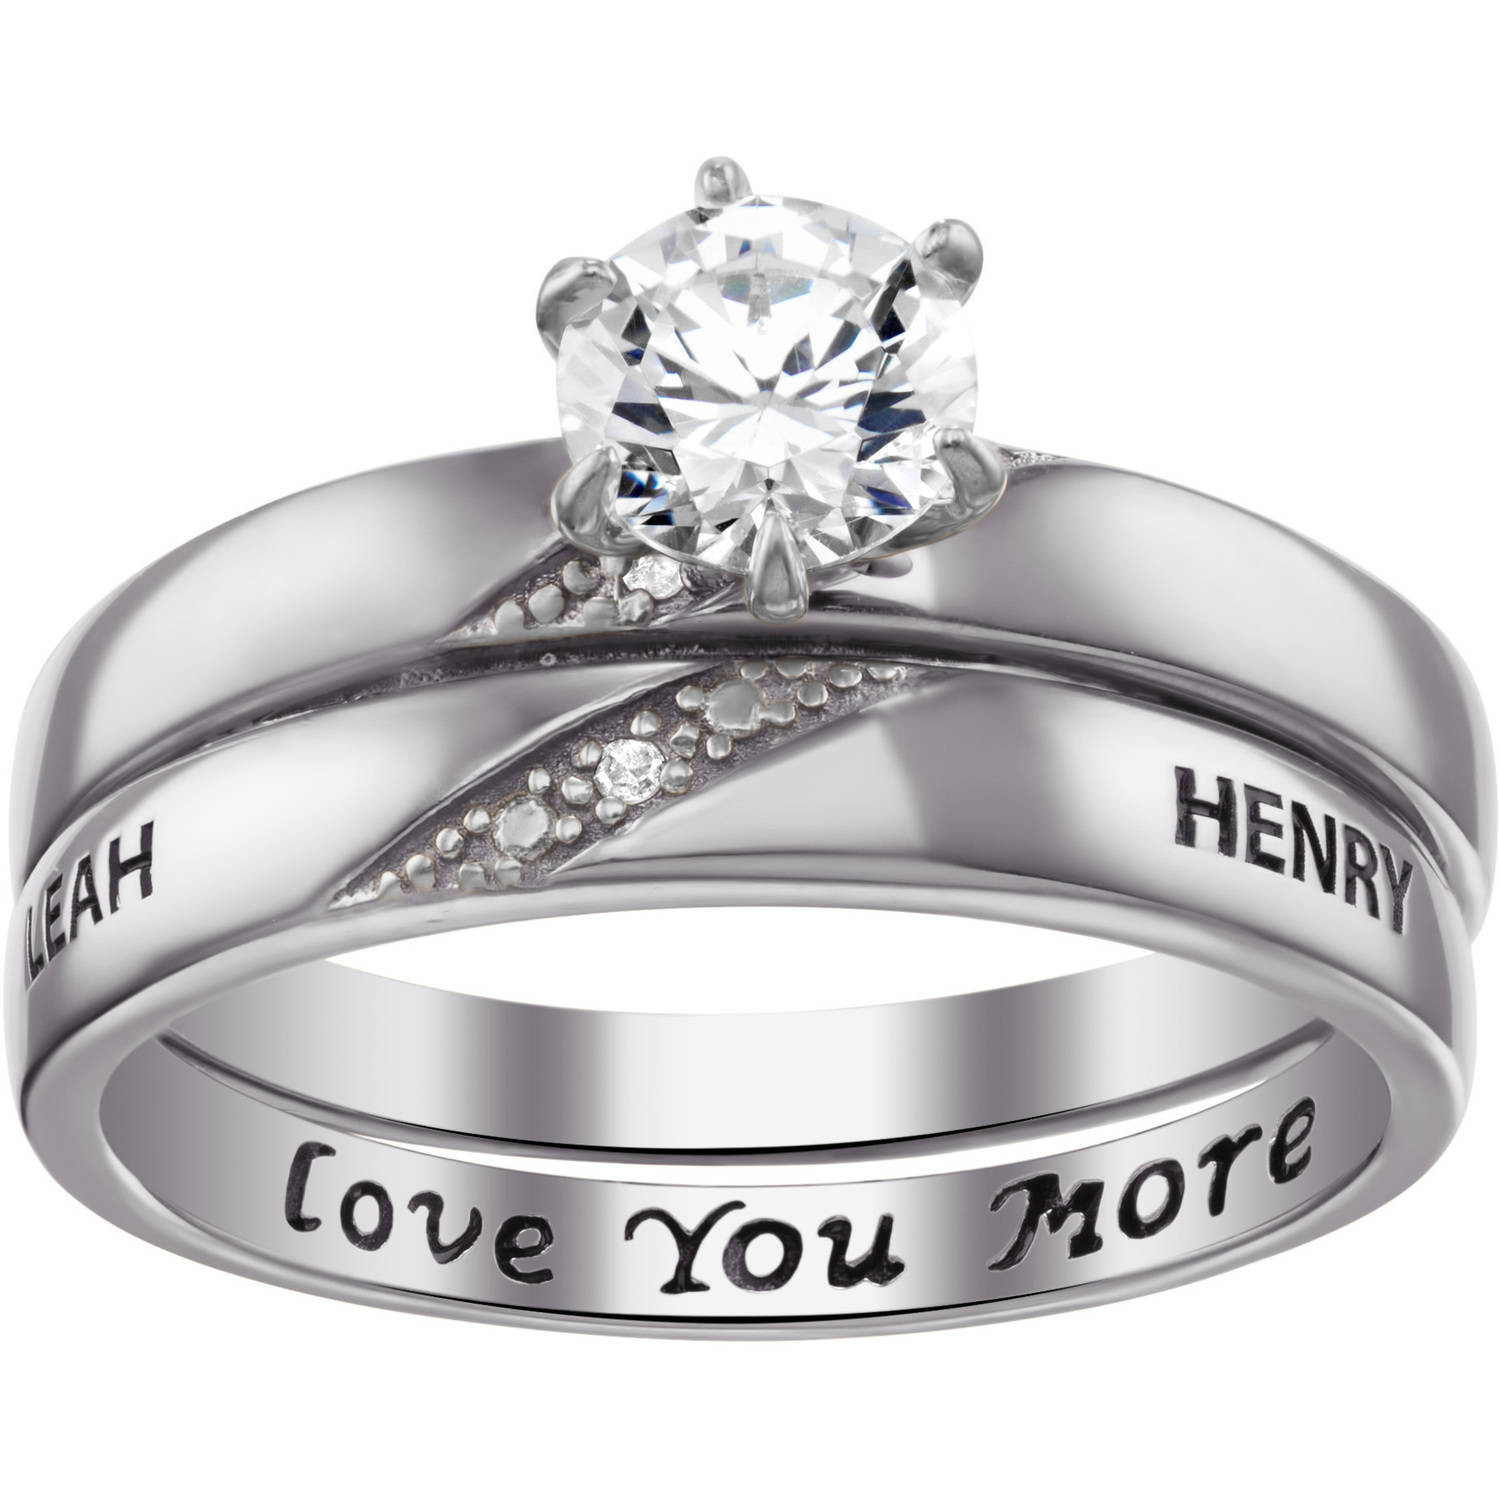 Wedding Rings Sets At Walmart
 ONLINE Personalized Round CZ and Diamond Sterling Silver